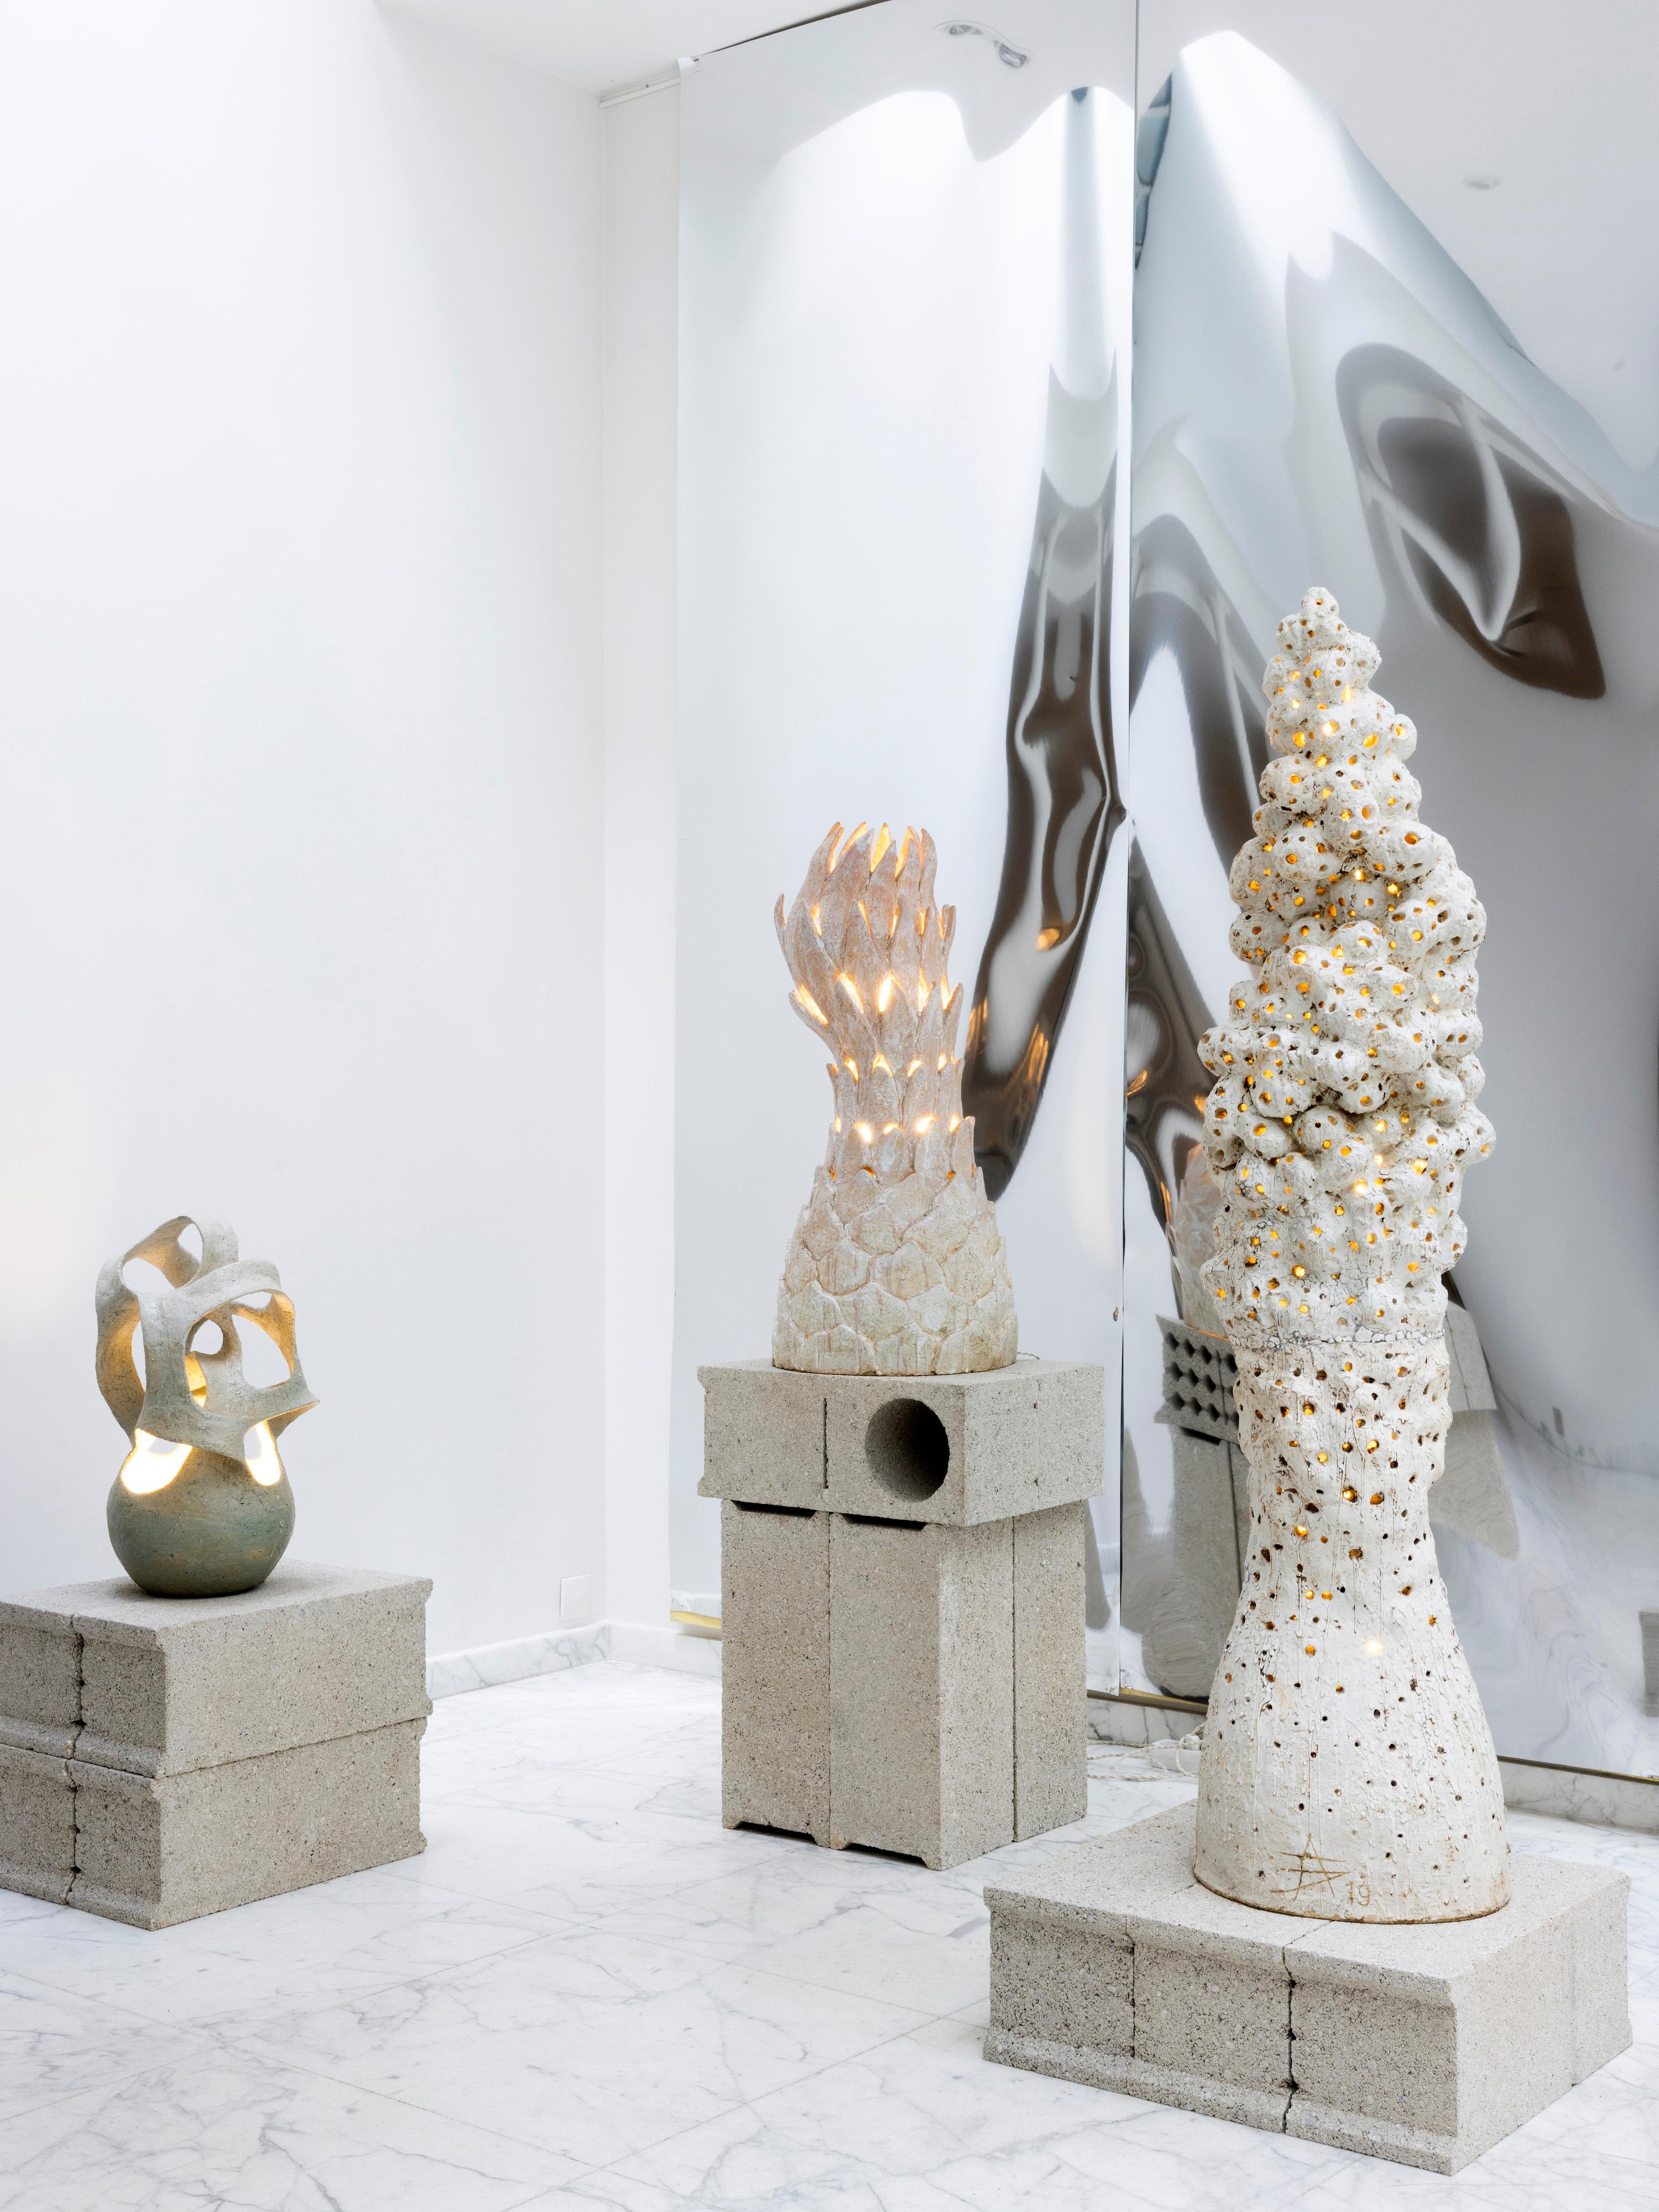 Colonne Morille by Agnès Debizet, 2019

Floor lamp Sculpture made of stoneware and porcelain slip, unique piece signed and dated.

Dimensions: H 147 x 38 cm

The lighting sculpture alludes to a morel mushroom. This open work illustrates the